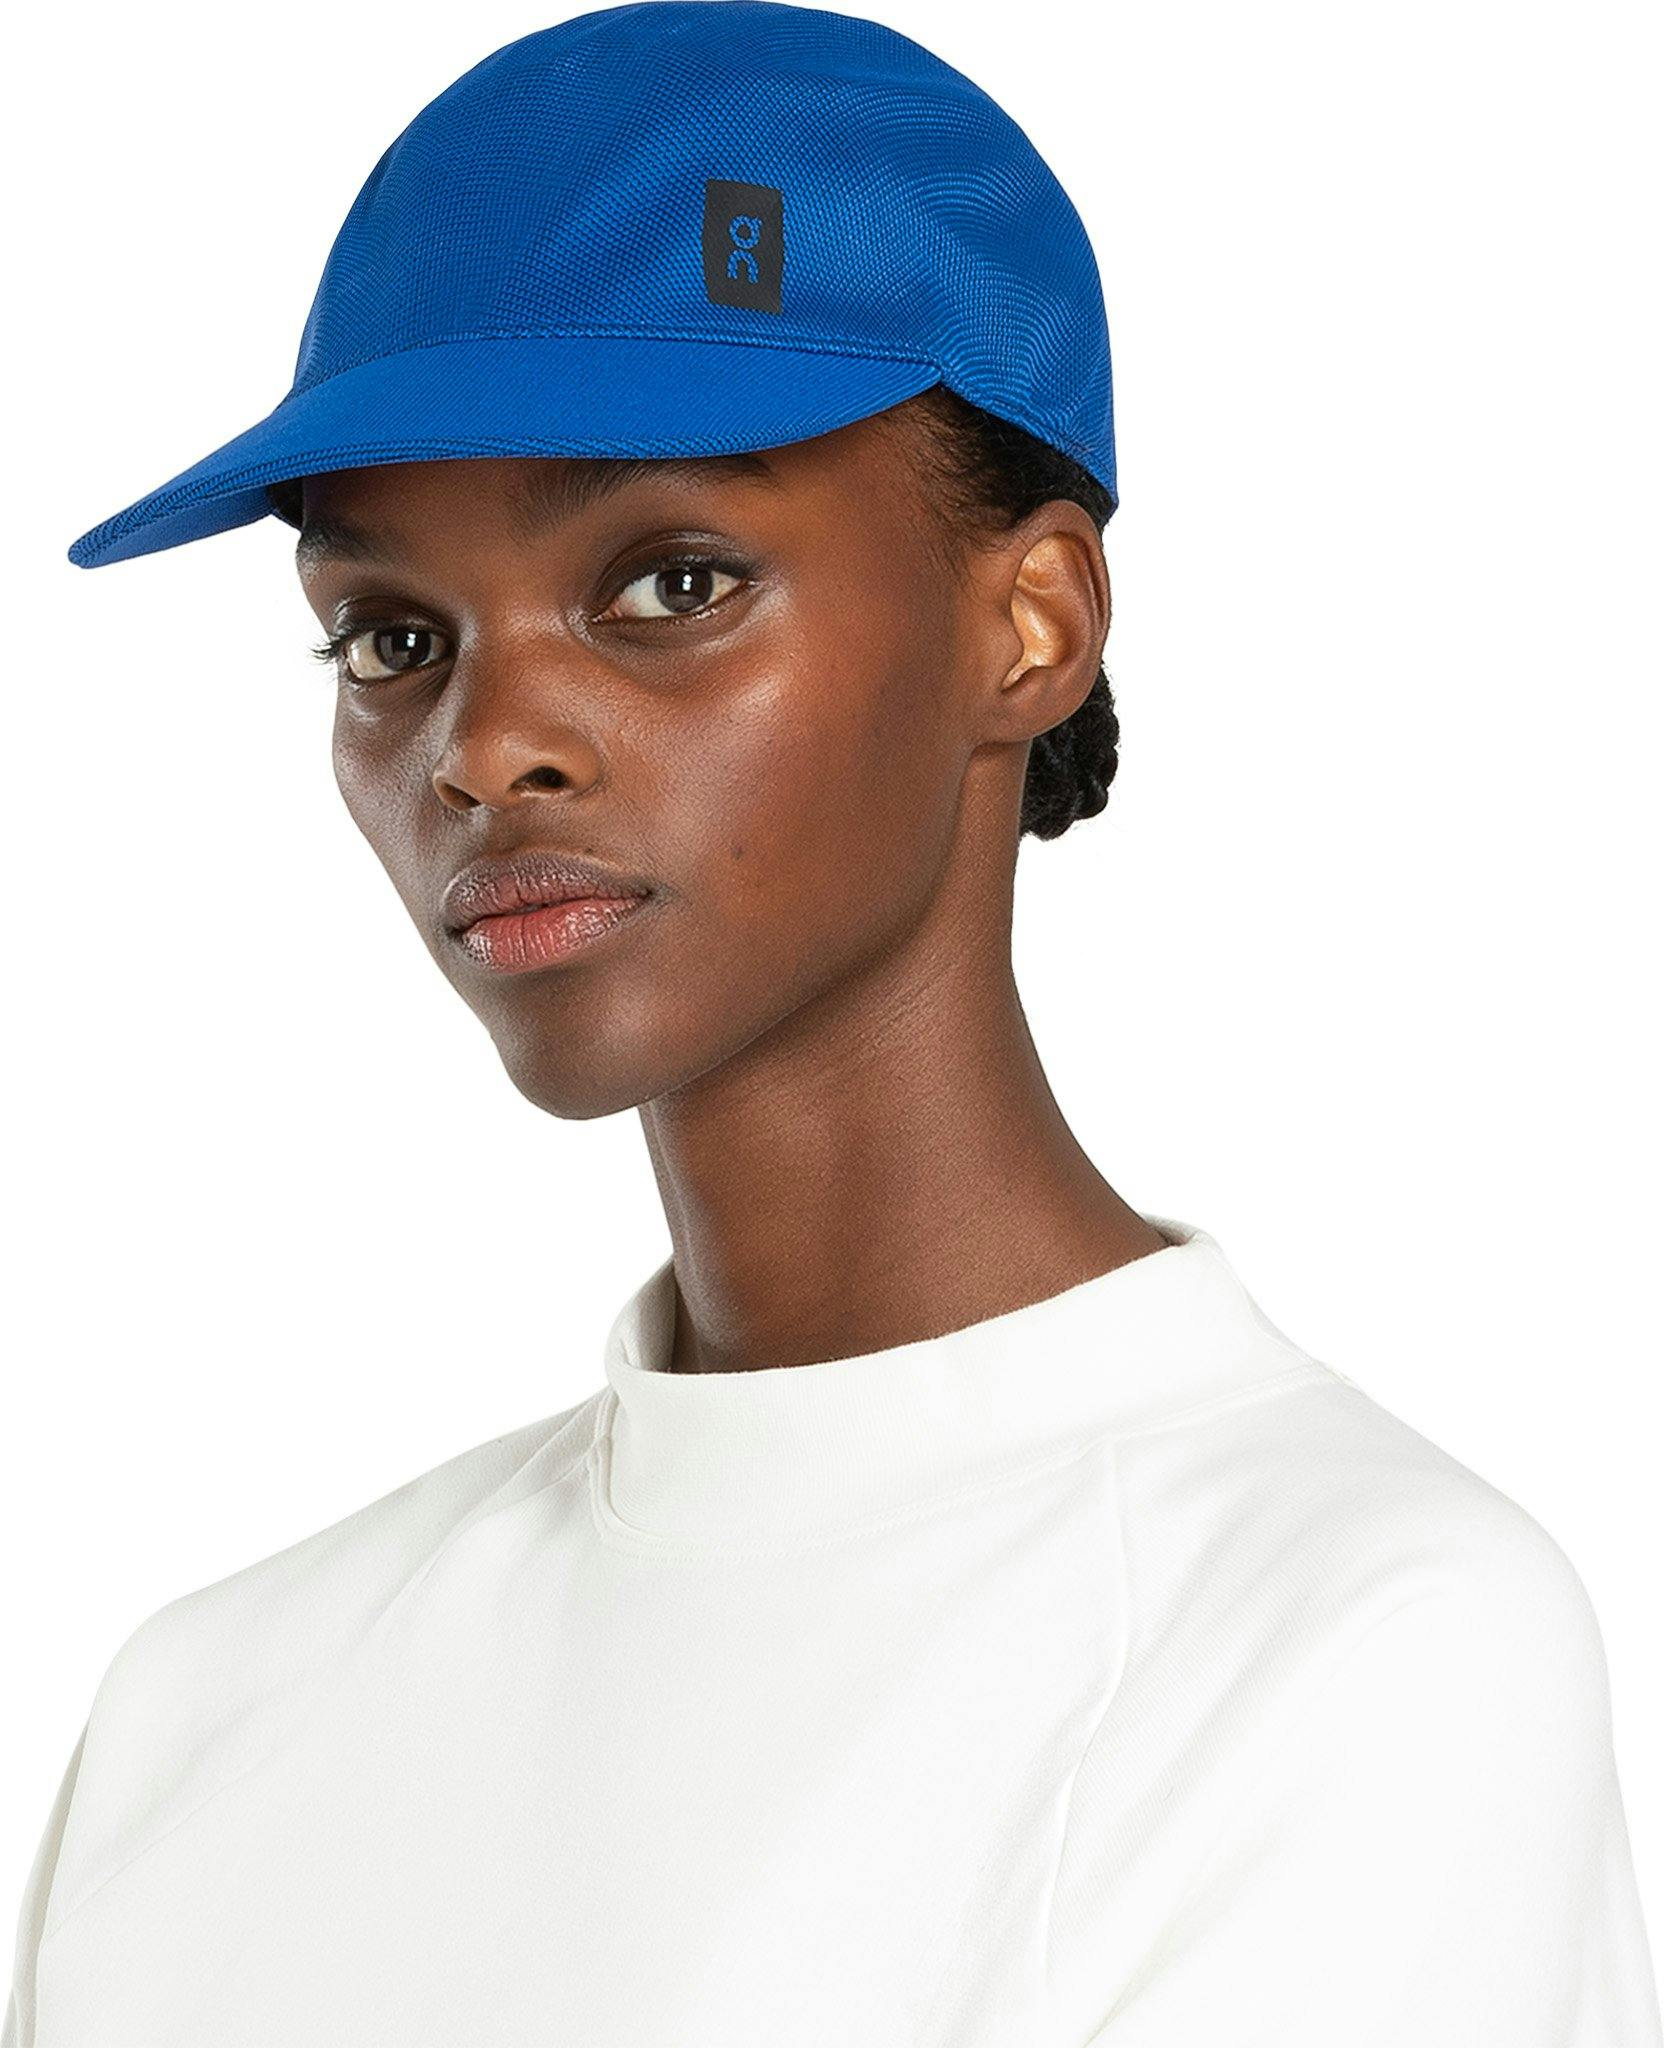 Product image for Moulded Cap - Unisex